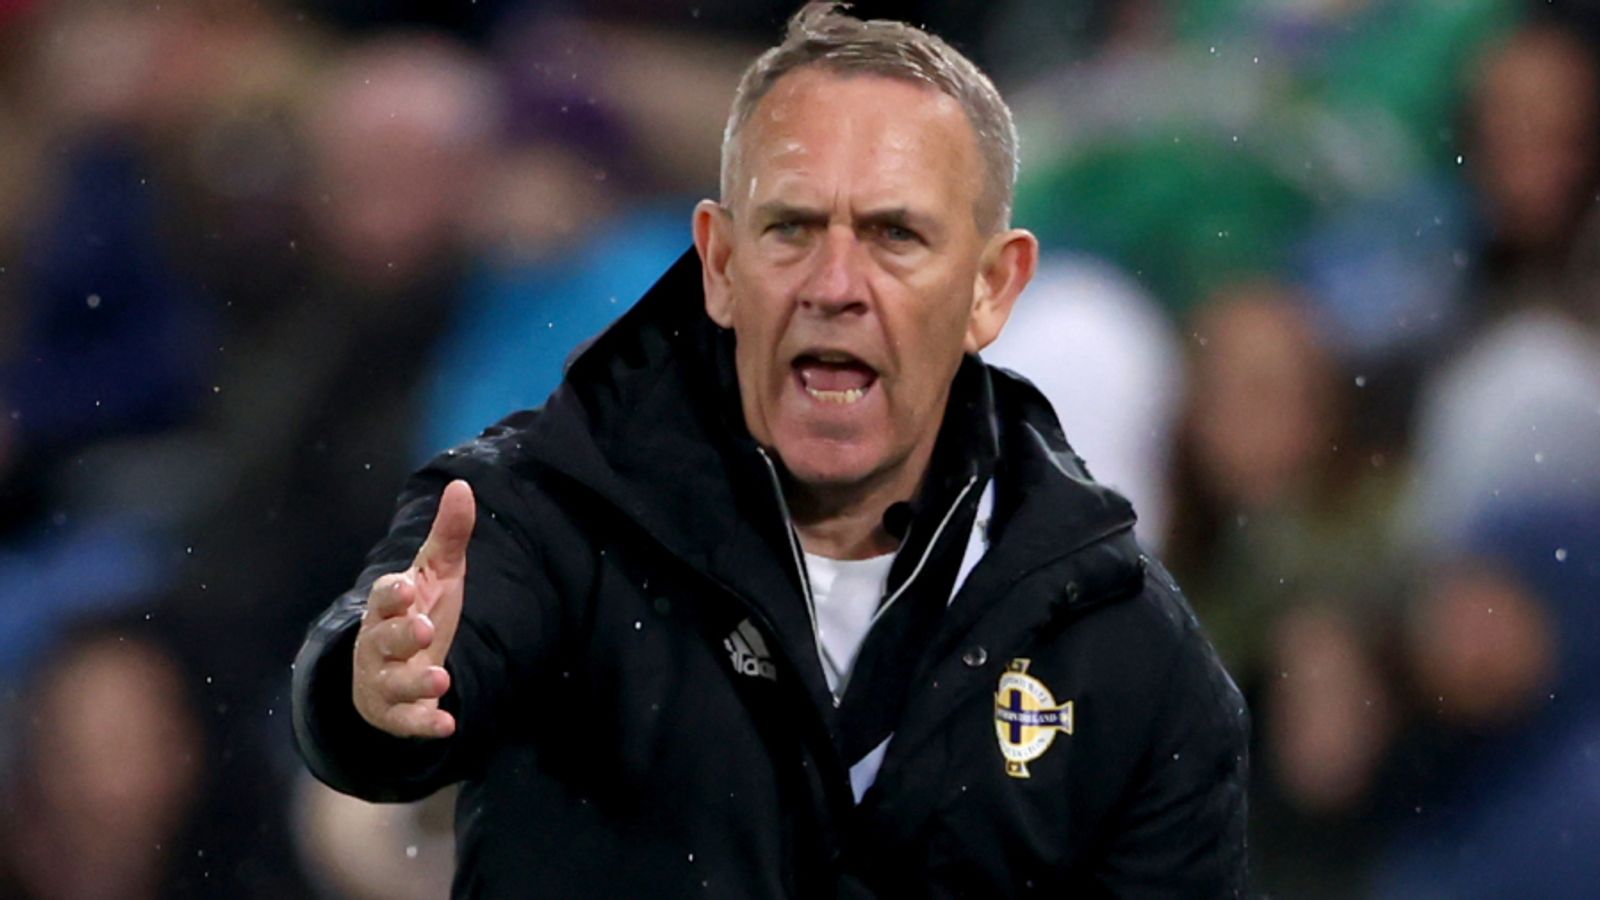 Kenny Shiels negotiating departure as Northern Ireland Women’s manager with Irish Football Association  